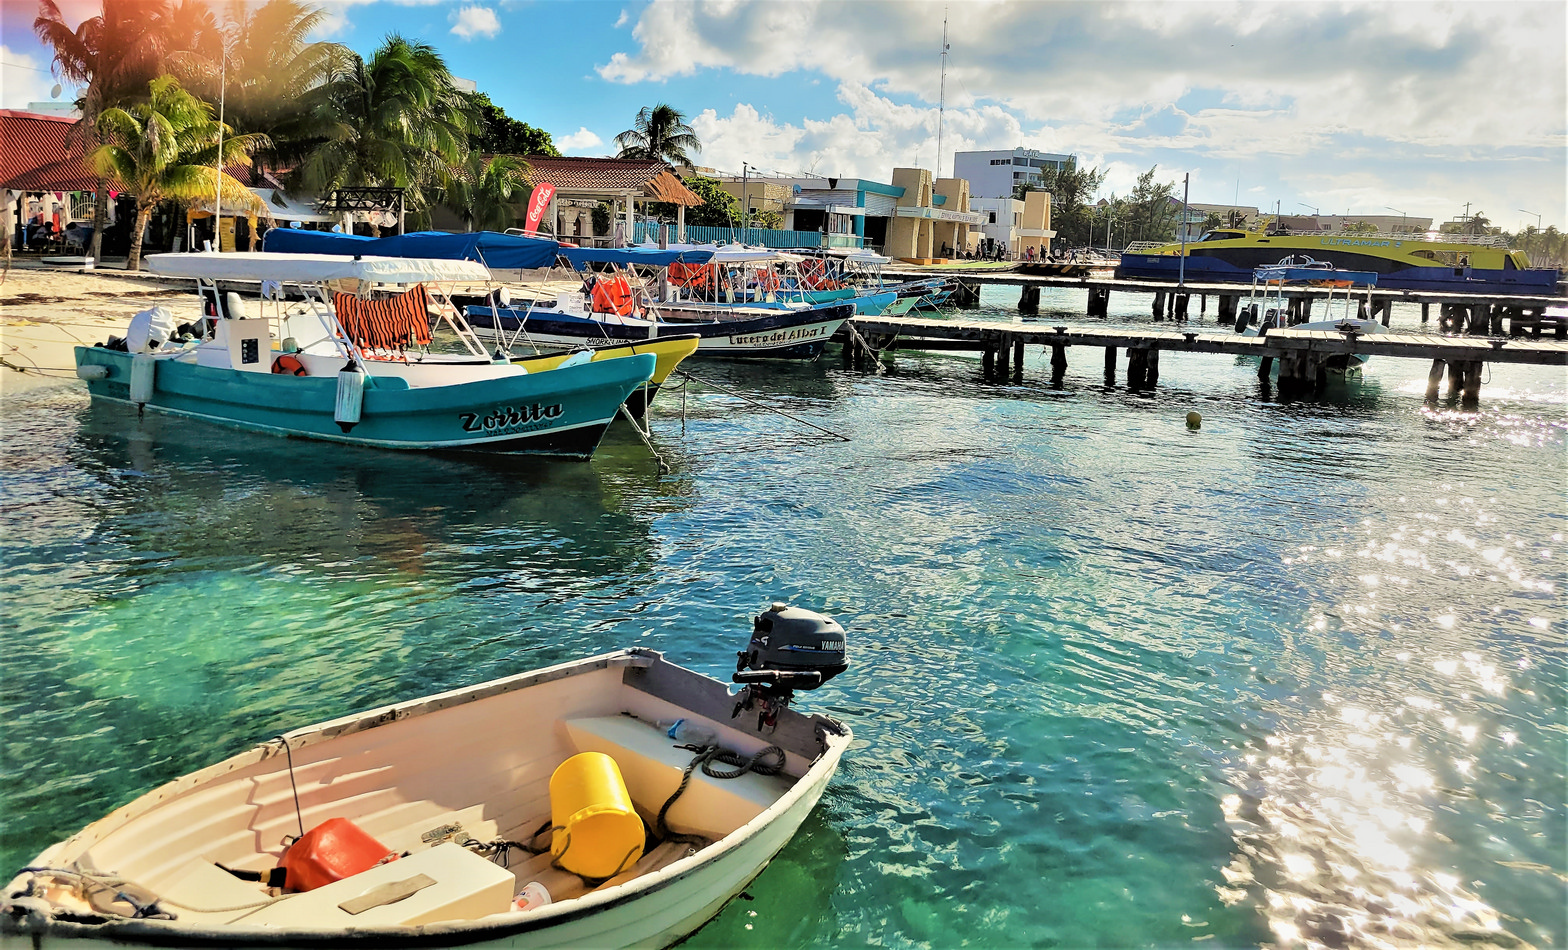 The boats from the mainland cross the Bahia de Mujeres to the downtown area where there are restaurants, shops, galleries, and golf cart rentals to navigate the island. © 2021 Jane Simon Ammeson